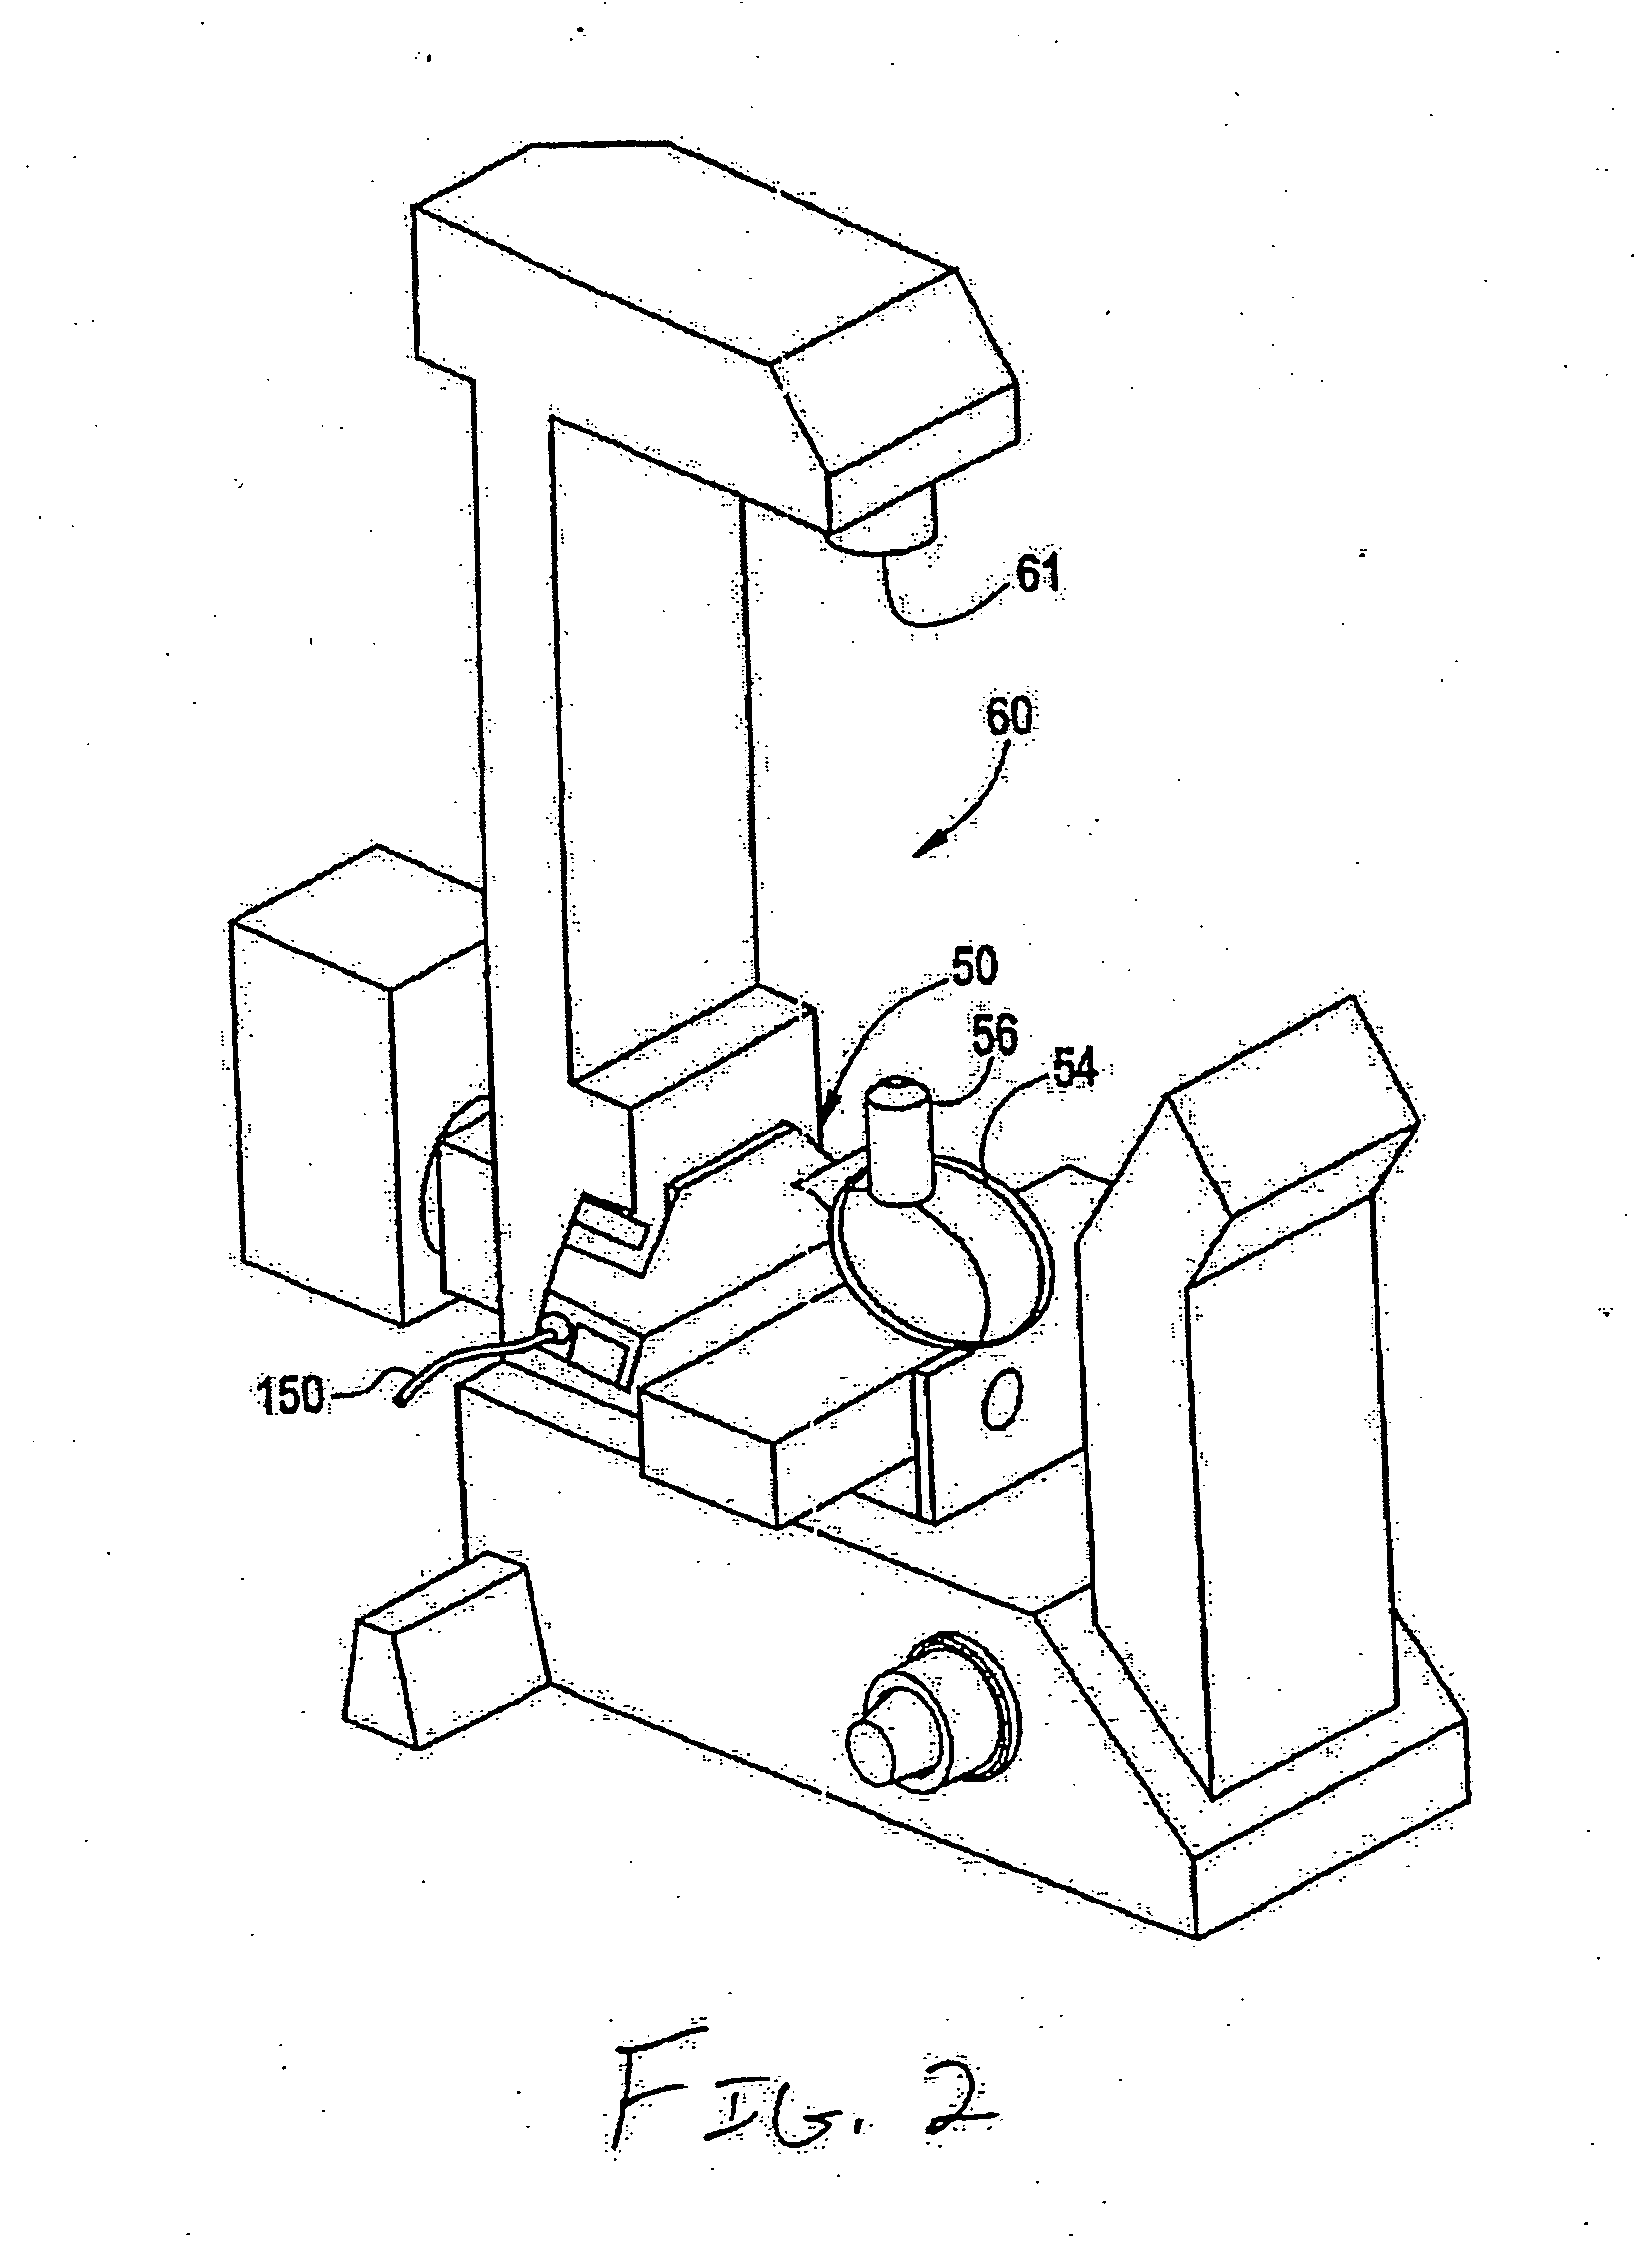 System and method for manipulating and processing materials using holographic optical trapping